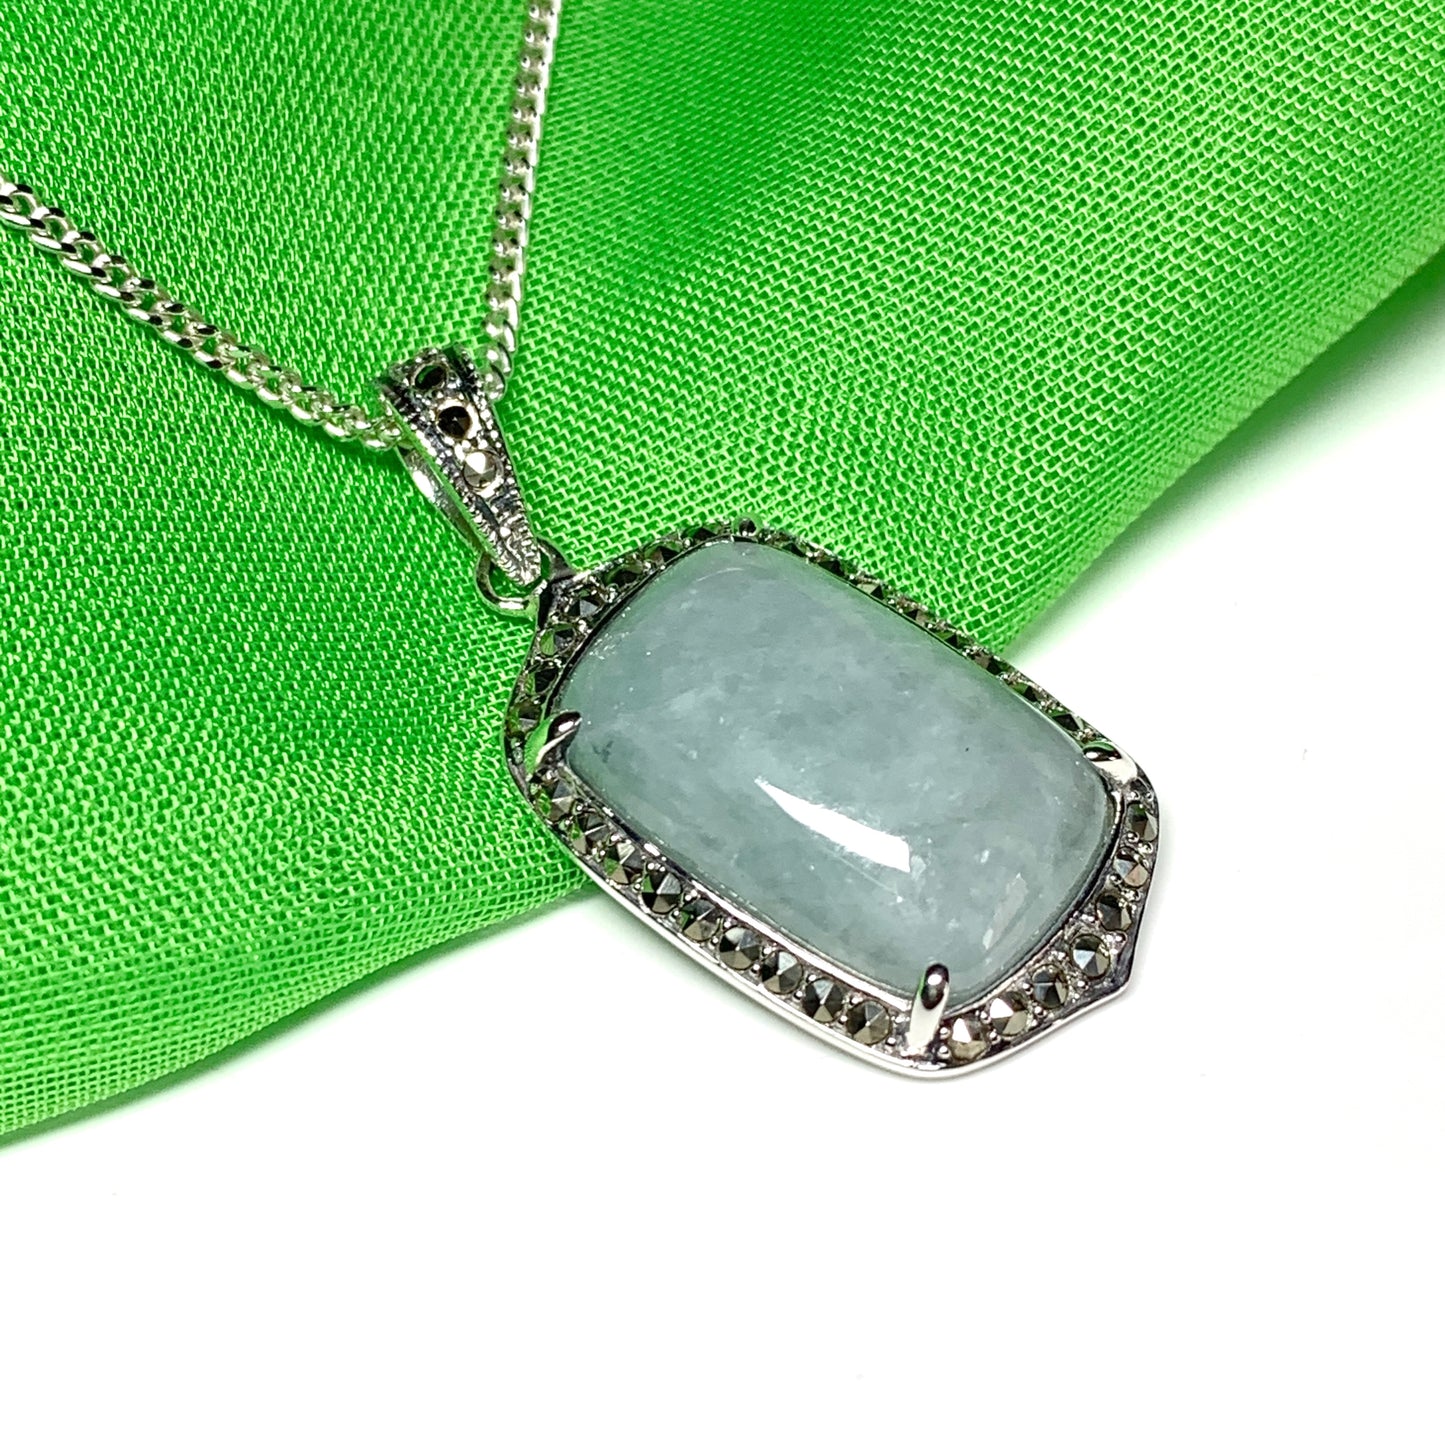 Long cushion shaped silver green jade and marcasite necklace pendant